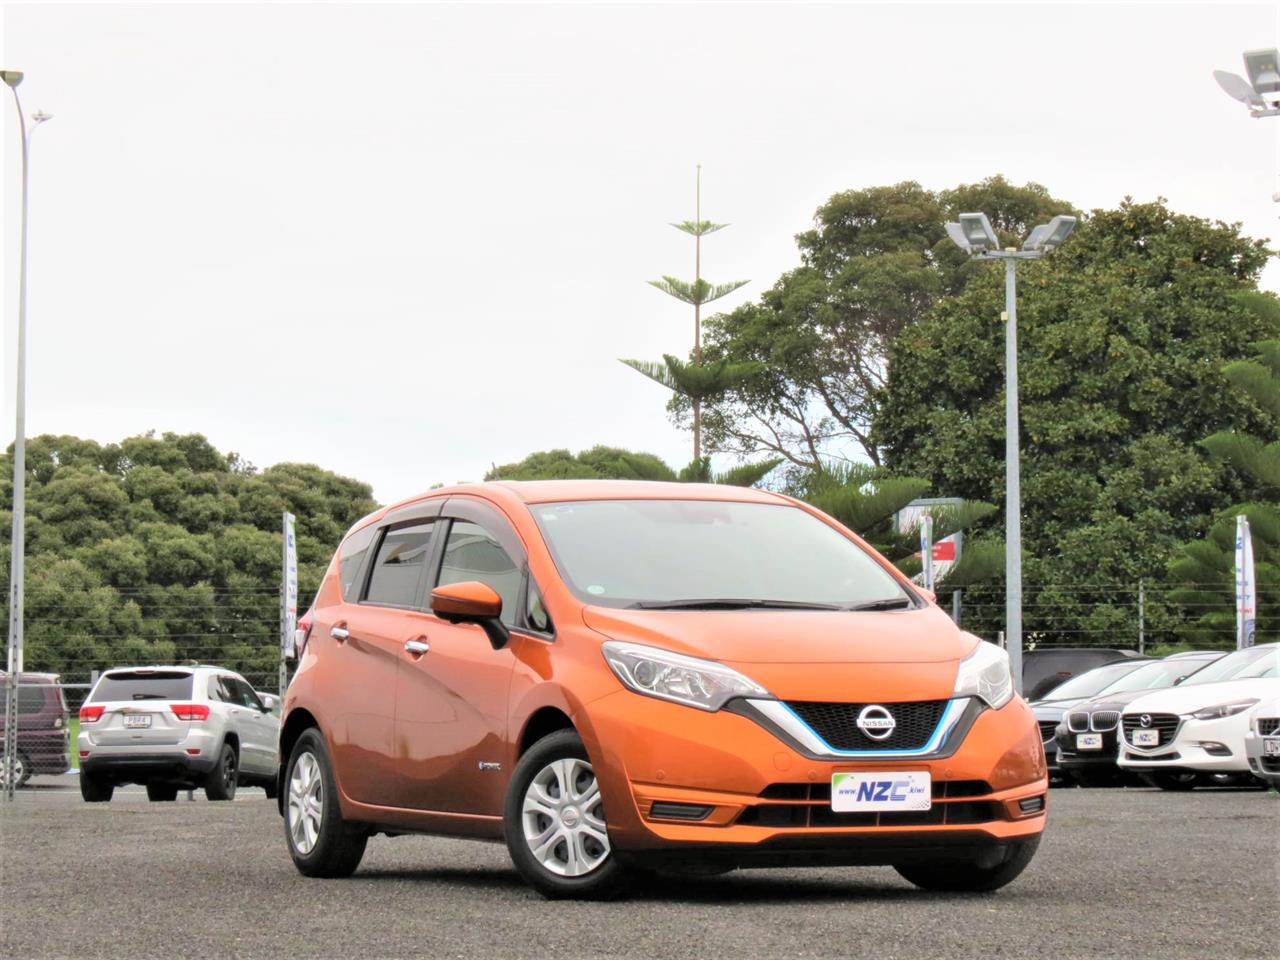 NZC 2016 Nissan NOTE just arrived to Auckland